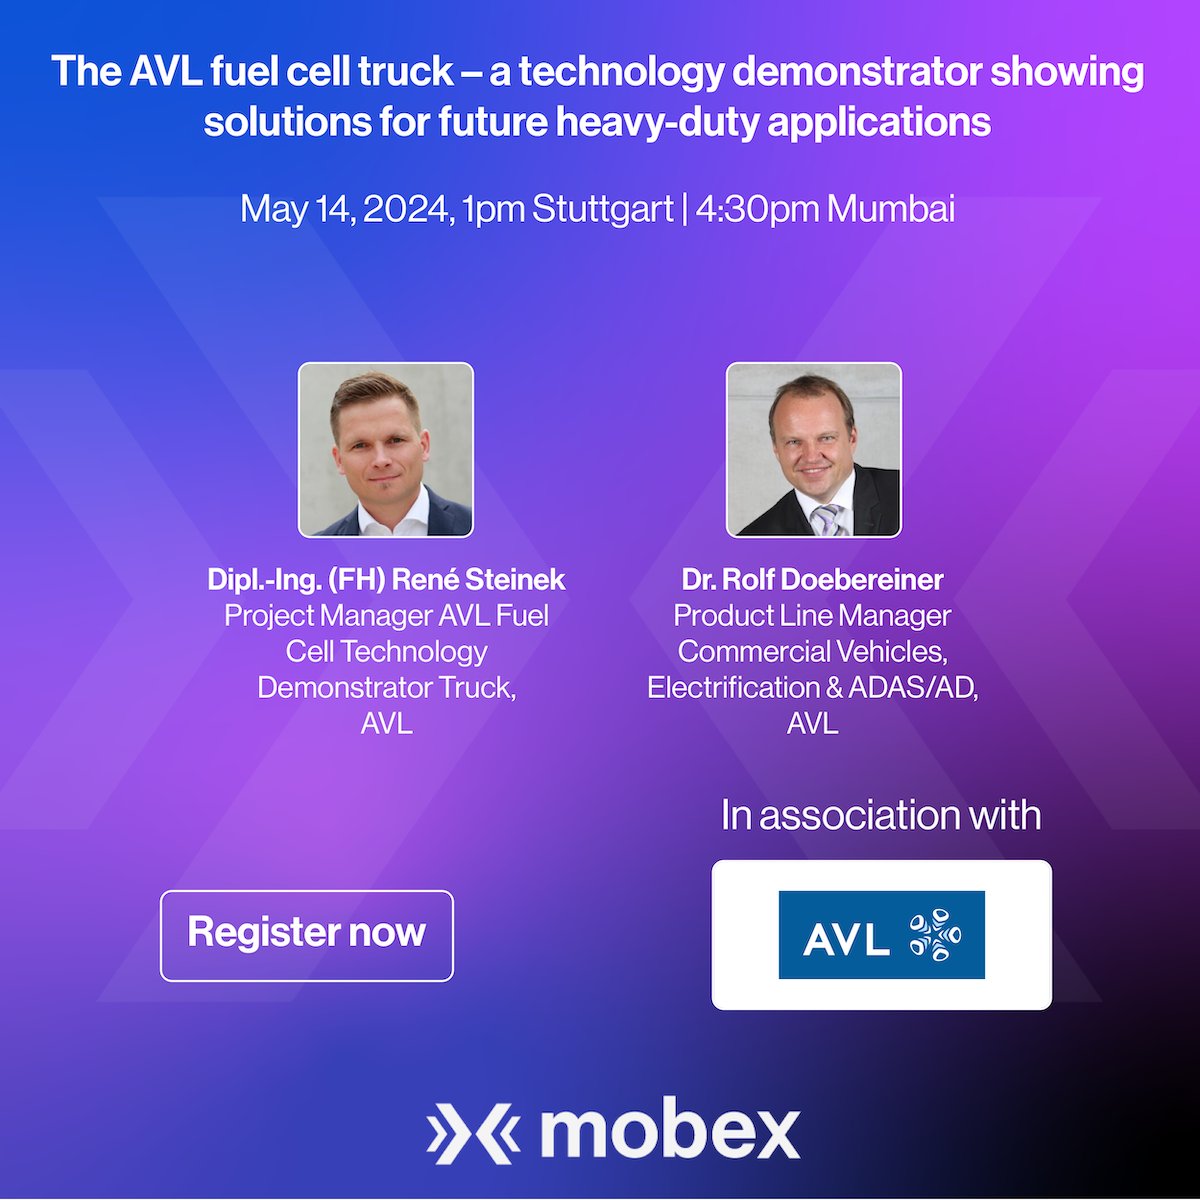 Live webinar: The AVL fuel cell truck – a technology demonstrator showing solutions for future heavy-duty applications by René Steinek and Rolf Doebereiner of AVL . May 14, 2024, 1pm Stuttgart | 4:30pm Mumbai | 7am Detroit. Register free: bit.ly/3wnpfW8